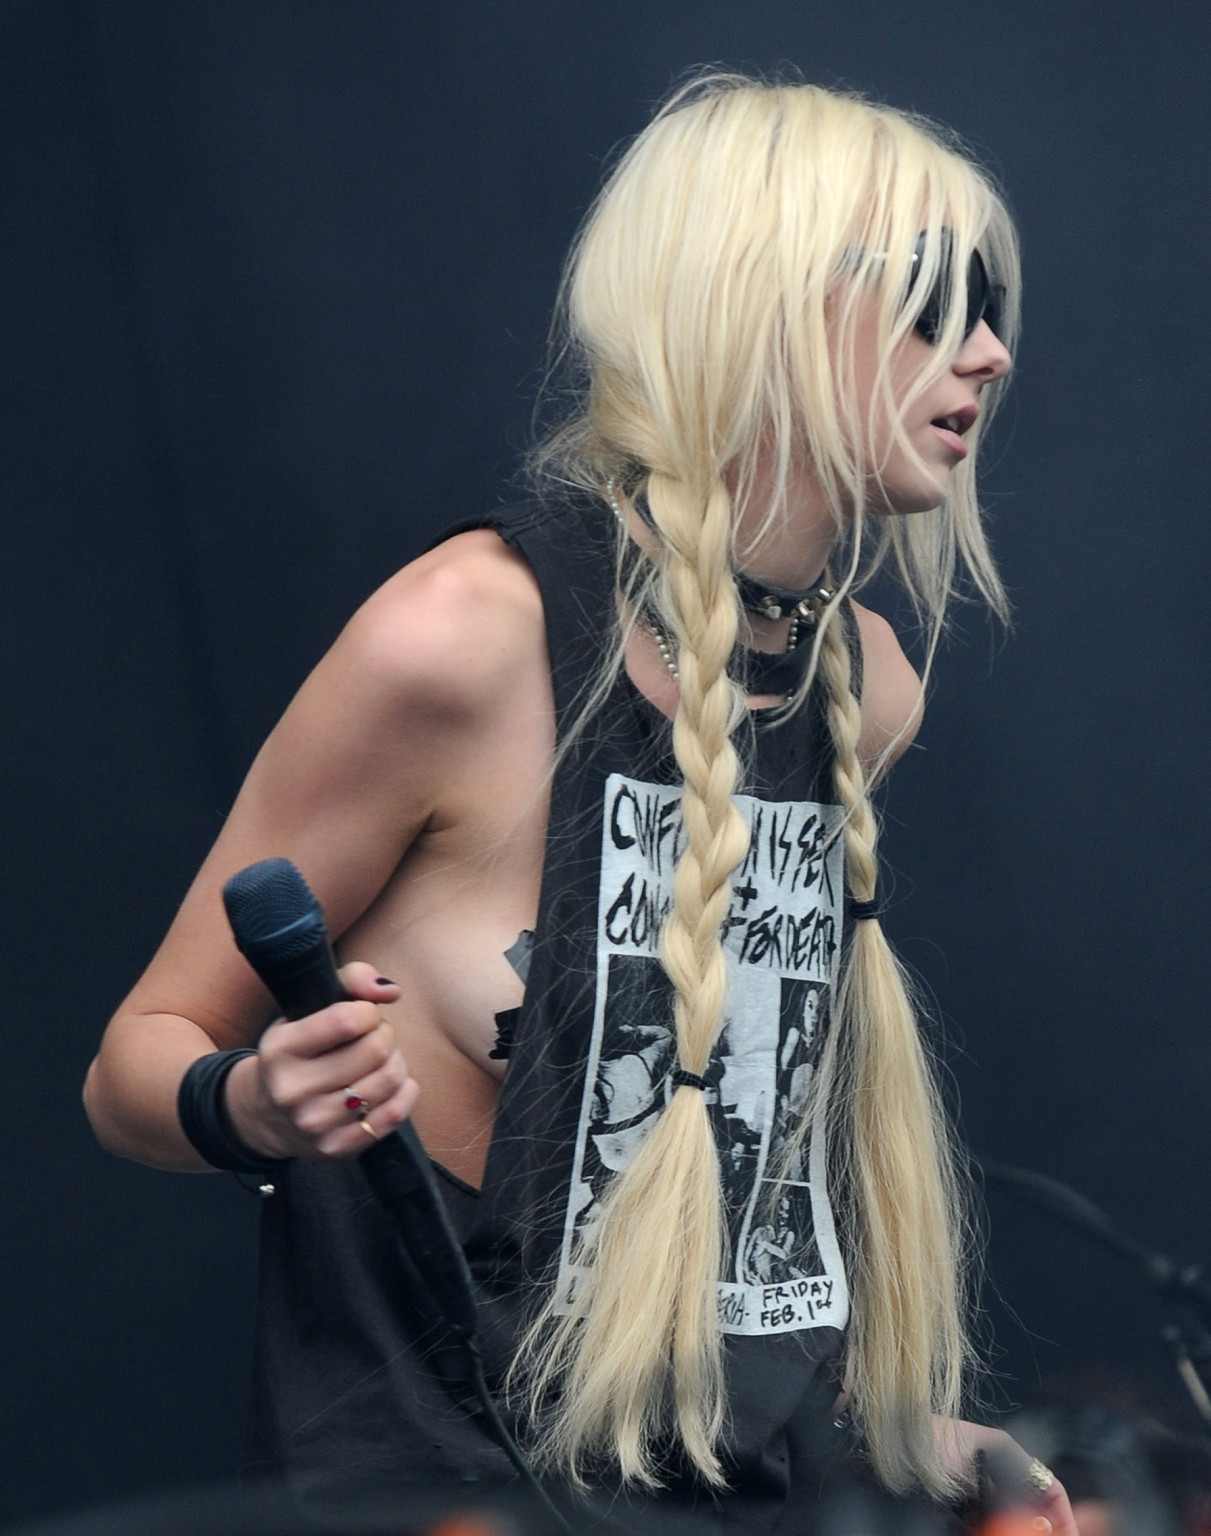 Taylor Momsen performing with taped nipples on 2011 Download Festival